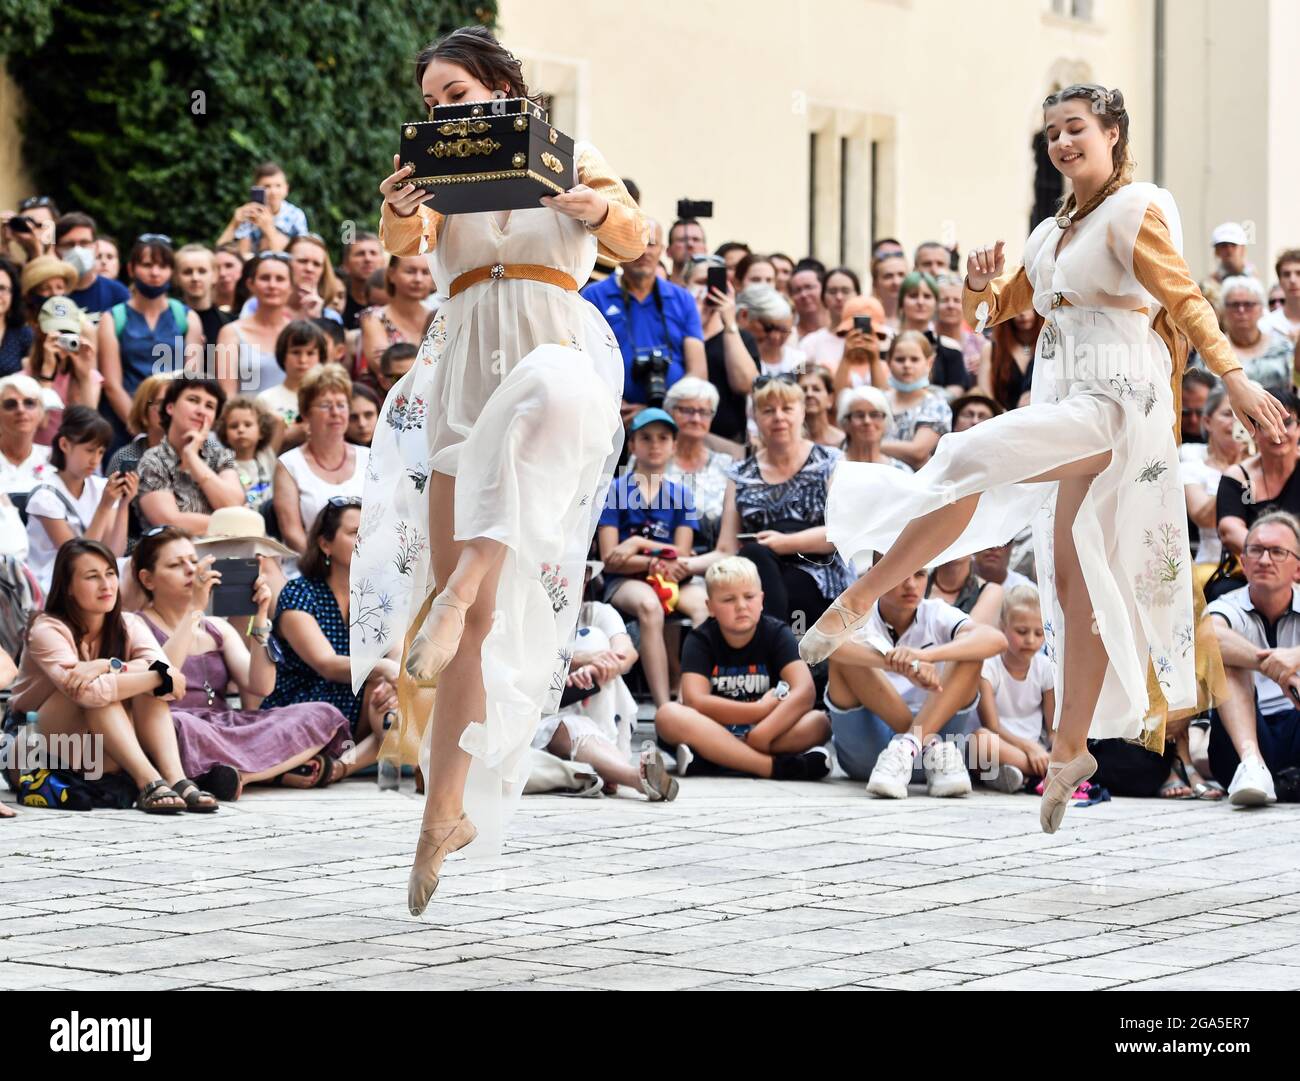 Krakow, Poland. 24th July, 2021. Performers dancing on stage during the fashion show.Dancers from the Terpsichore Dance Theatre and actors from Nomina Rosae Teatr presented a reconstruction of Renaissance fashion in the courtyard of the Wawel Royal Castle in Krakow. (Photo by Alex Bona/SOPA Images/Sipa USA) Credit: Sipa USA/Alamy Live News Stock Photo